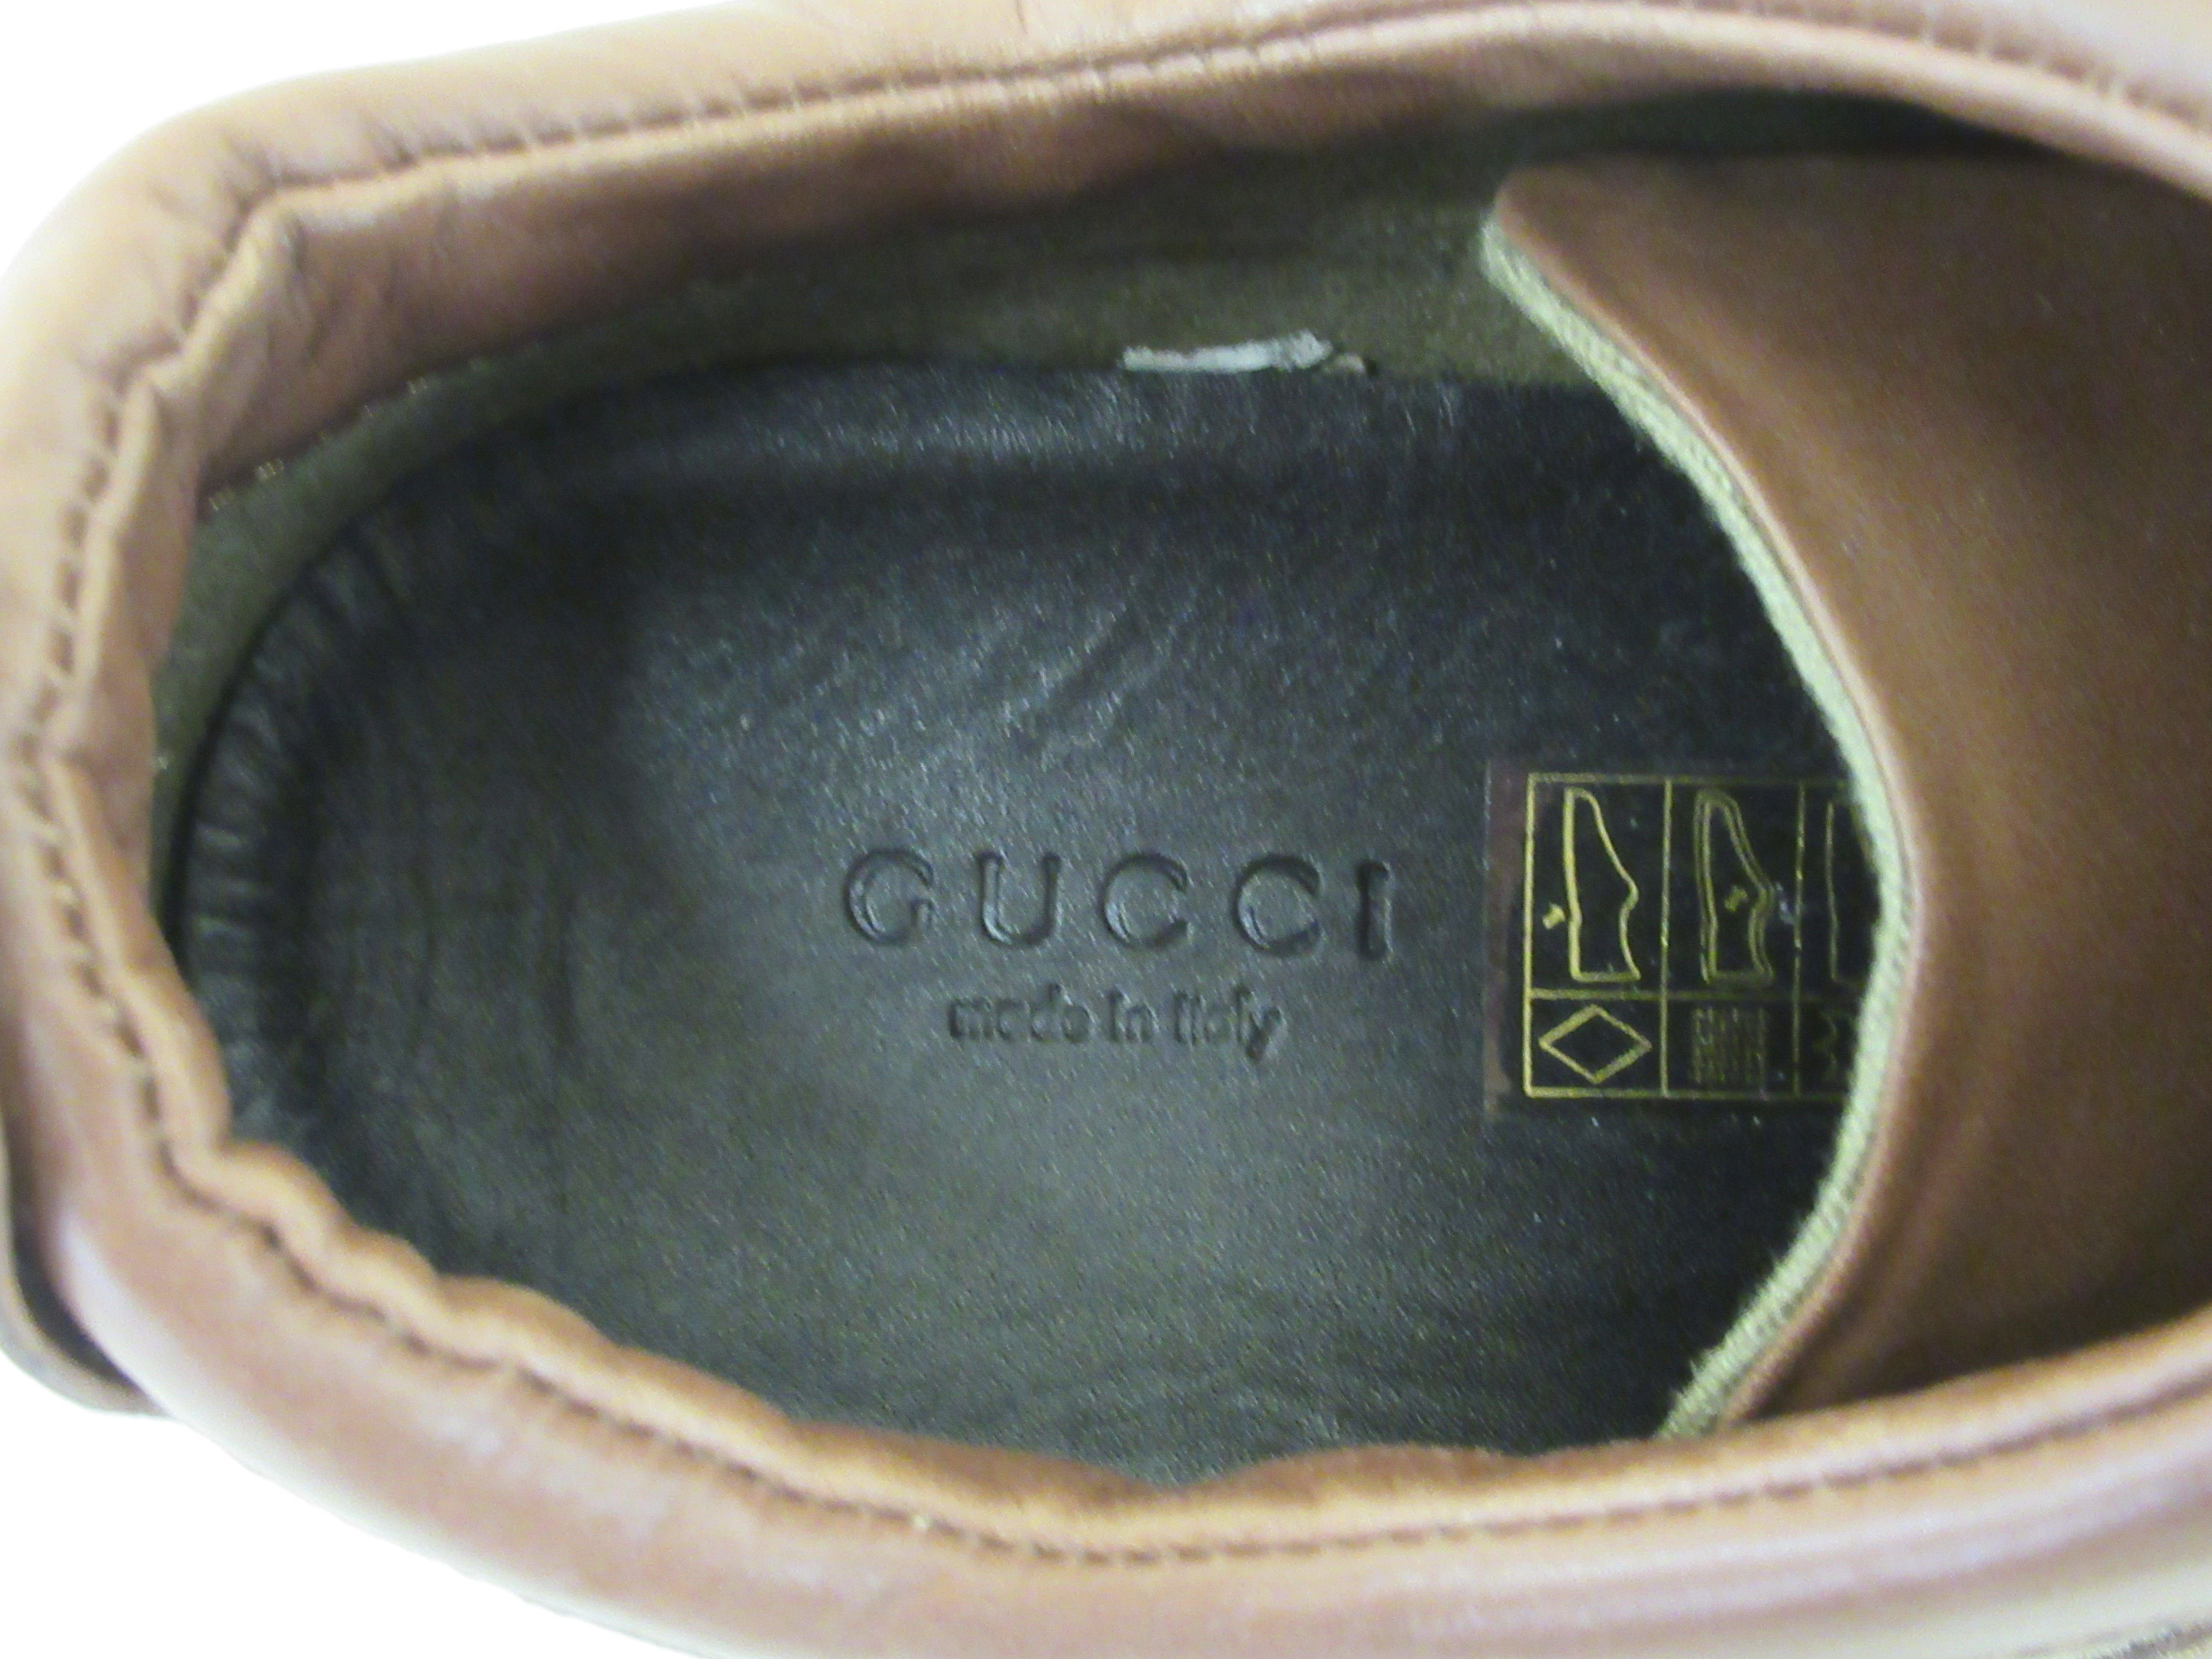 Ladies shoes, viz. three pairs of Gucci sportswear shoes approx. - Image 3 of 3